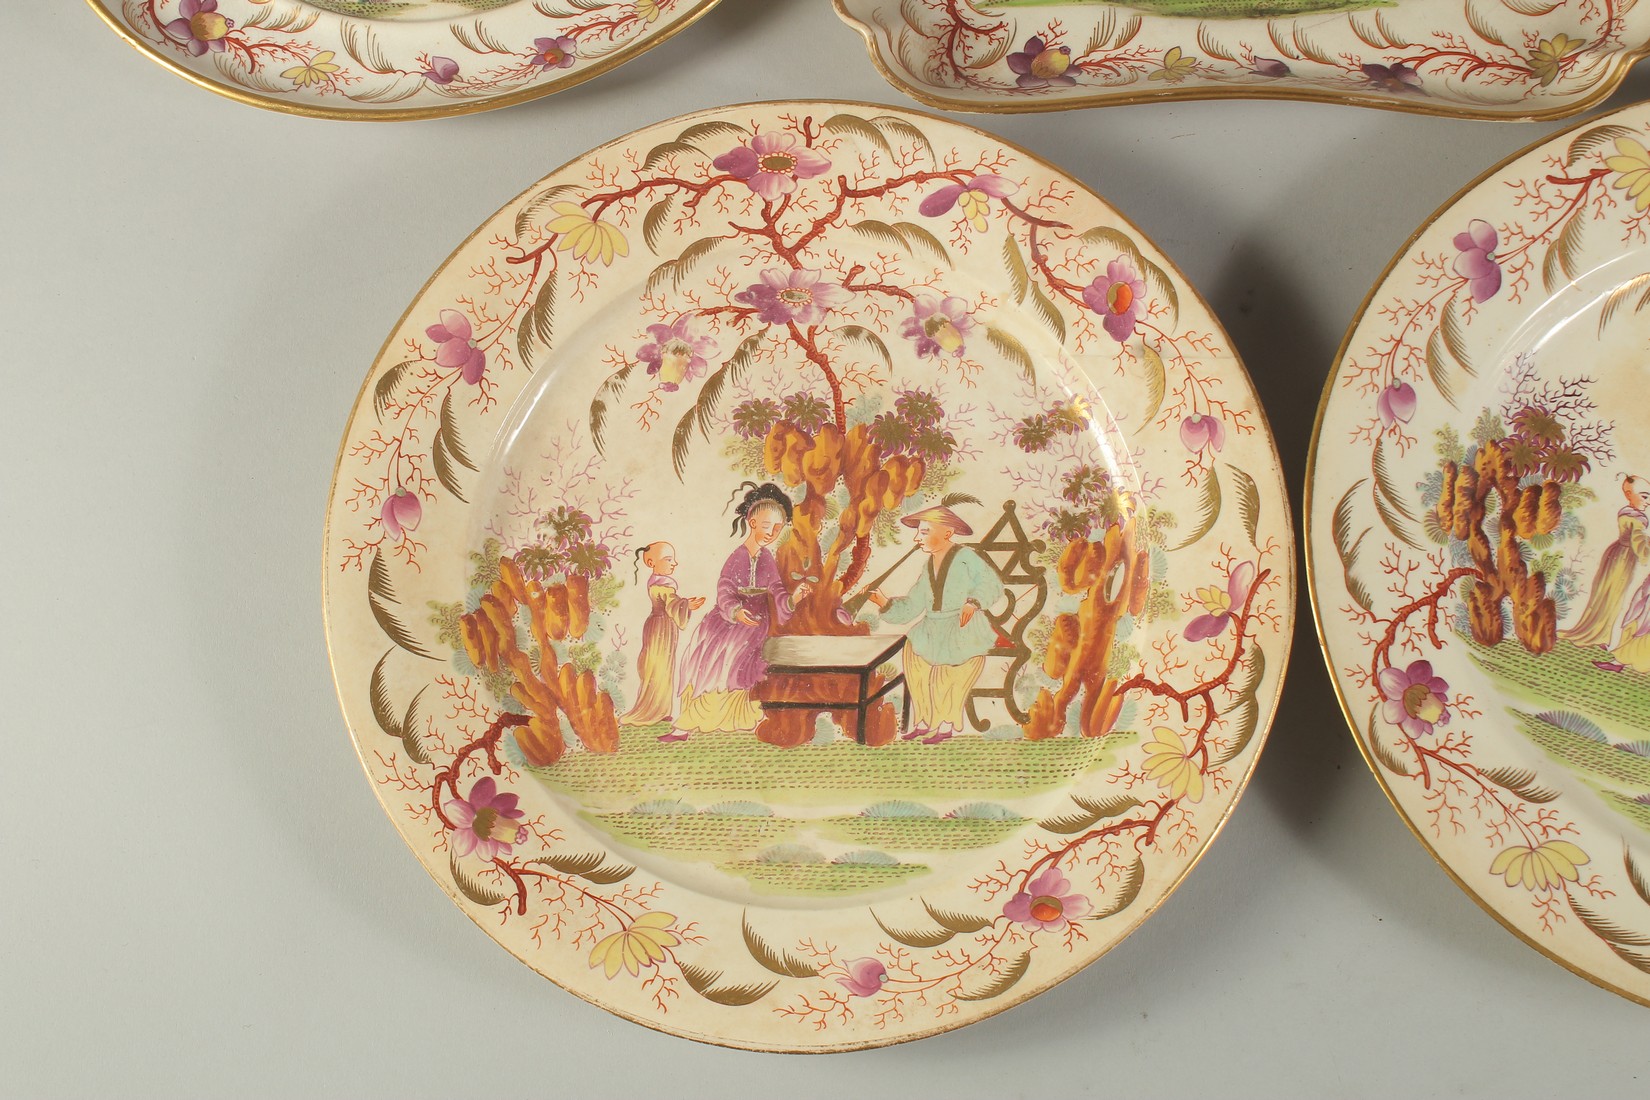 A PAIR OF LONGPORT CIRCULAR PLATES with Chinese design, 9ins diameter. Pair of oval dishes, 8ins - Image 6 of 7